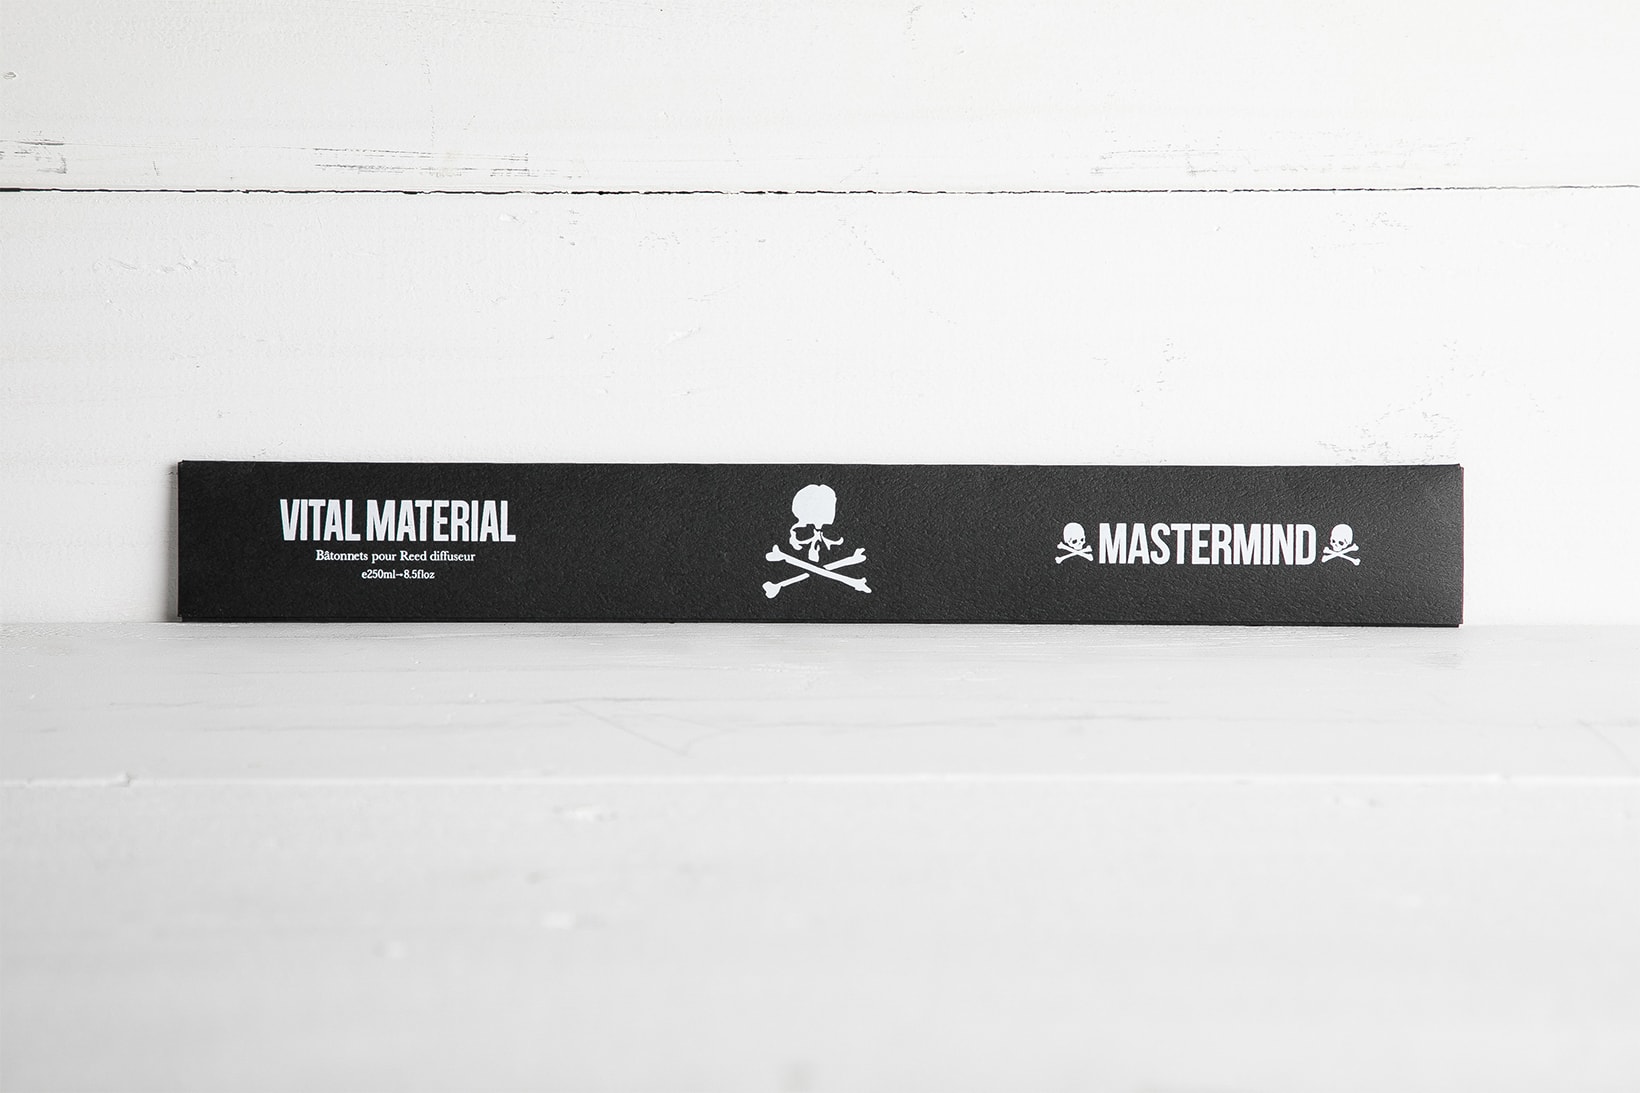 mastermind WORLD VITAL MATERIAL Reed Diffuser Black Limited Edition skull and crossbones white scent smell goods fragrance